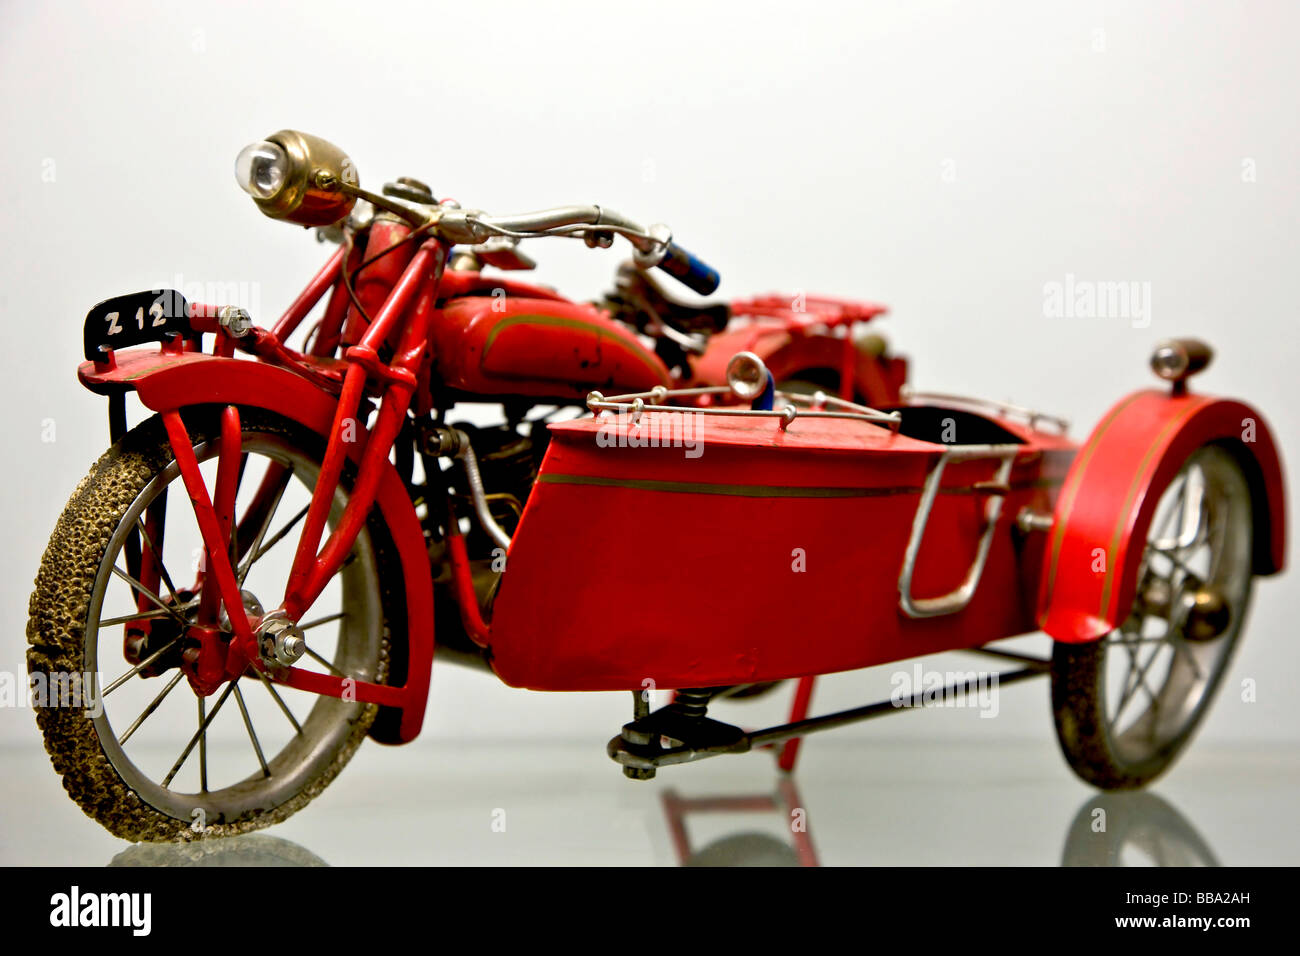 Toy motor cycle and sidecar Stock Photo